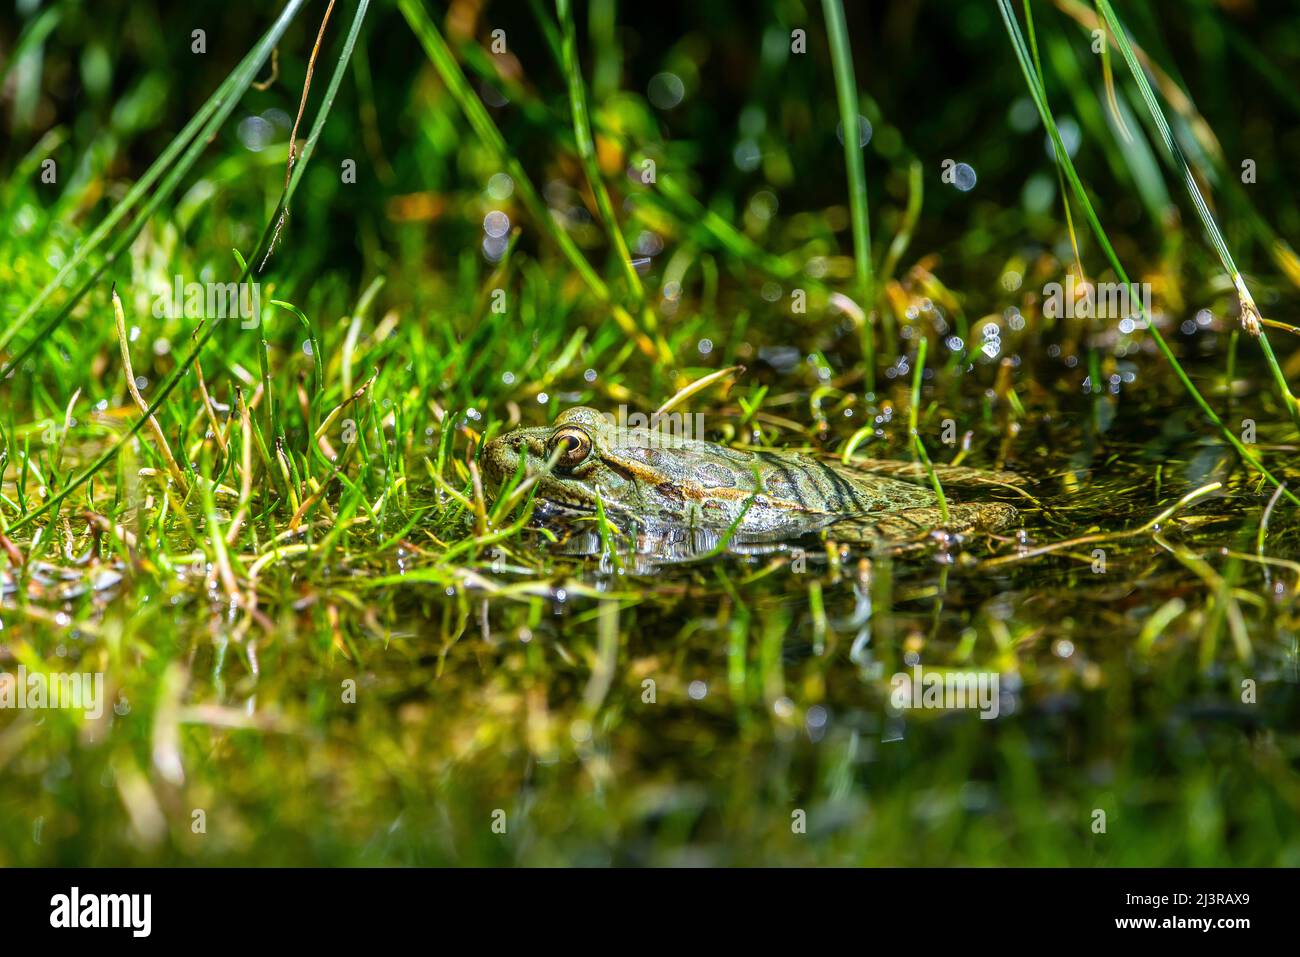 A frog in a pond Stock Photo